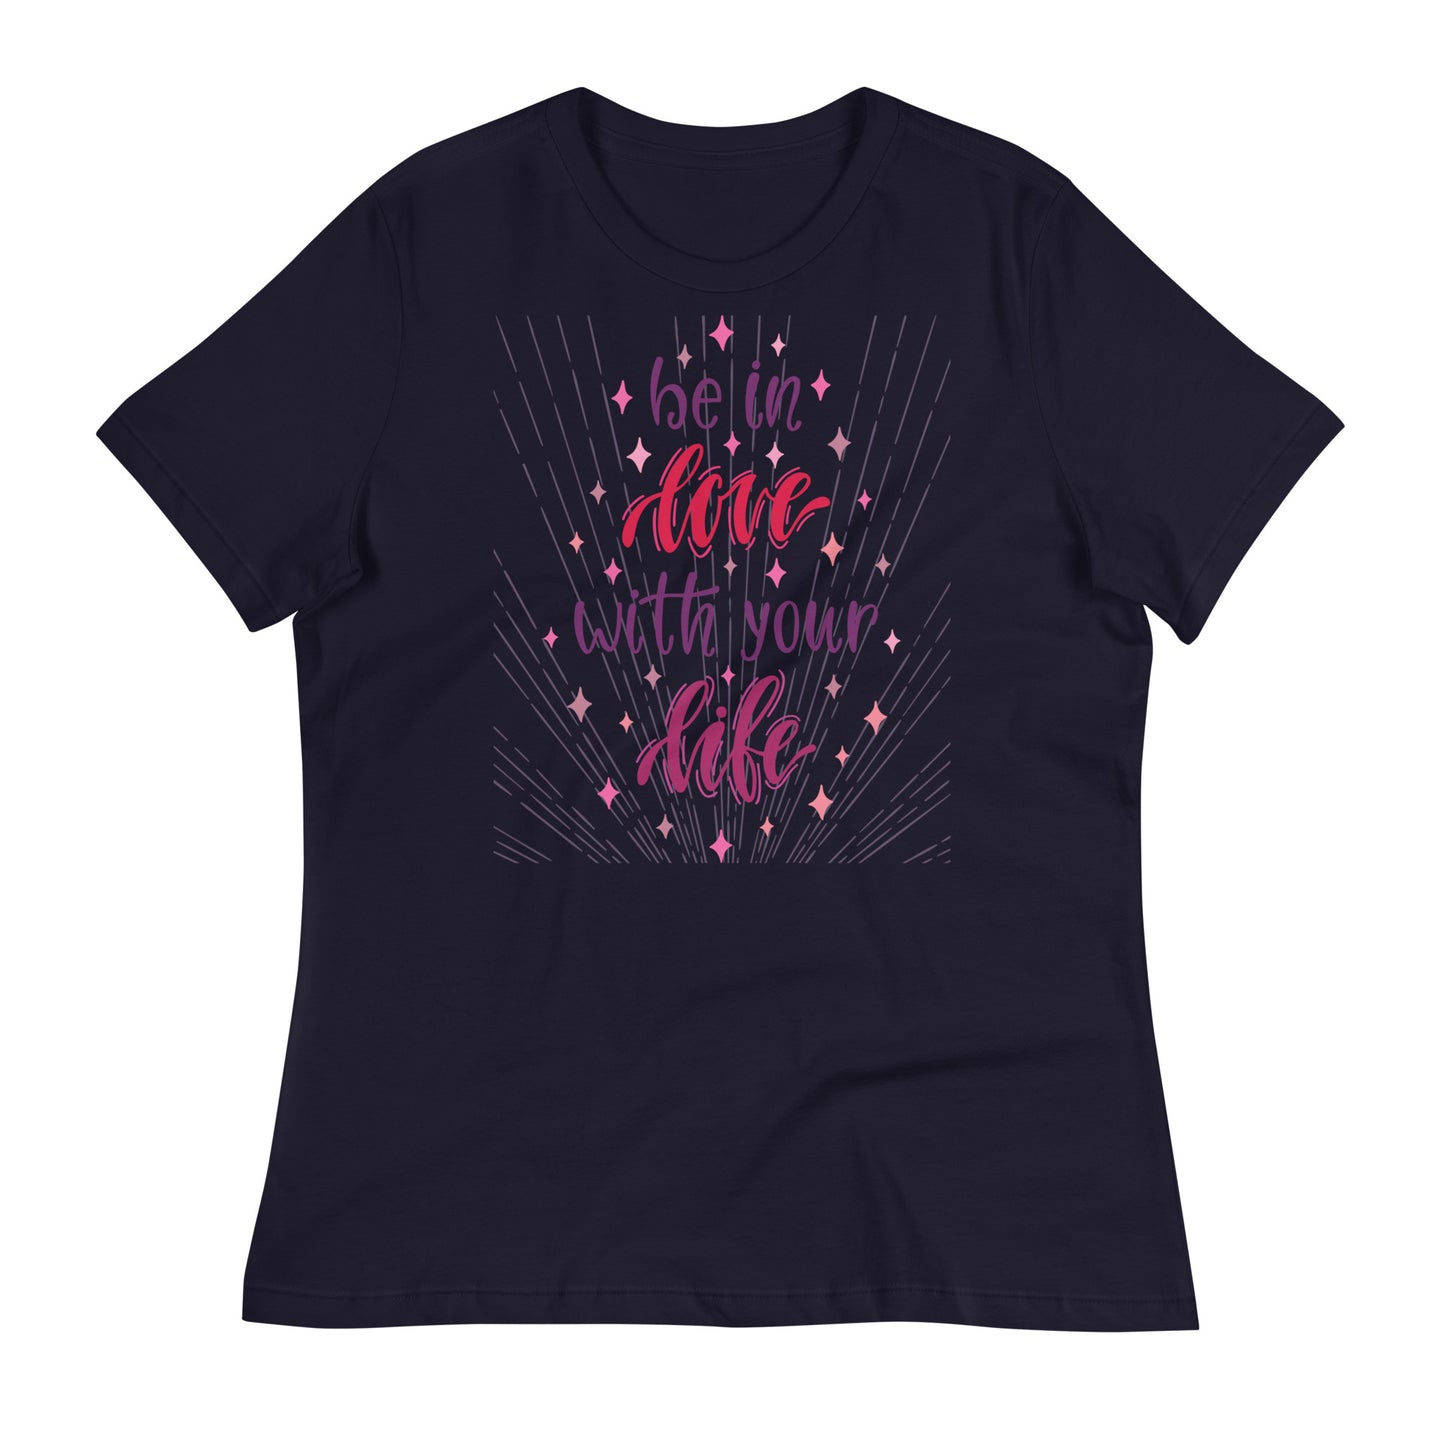 Be in Love with Your Life Women's Relaxed Fit T-Shirt